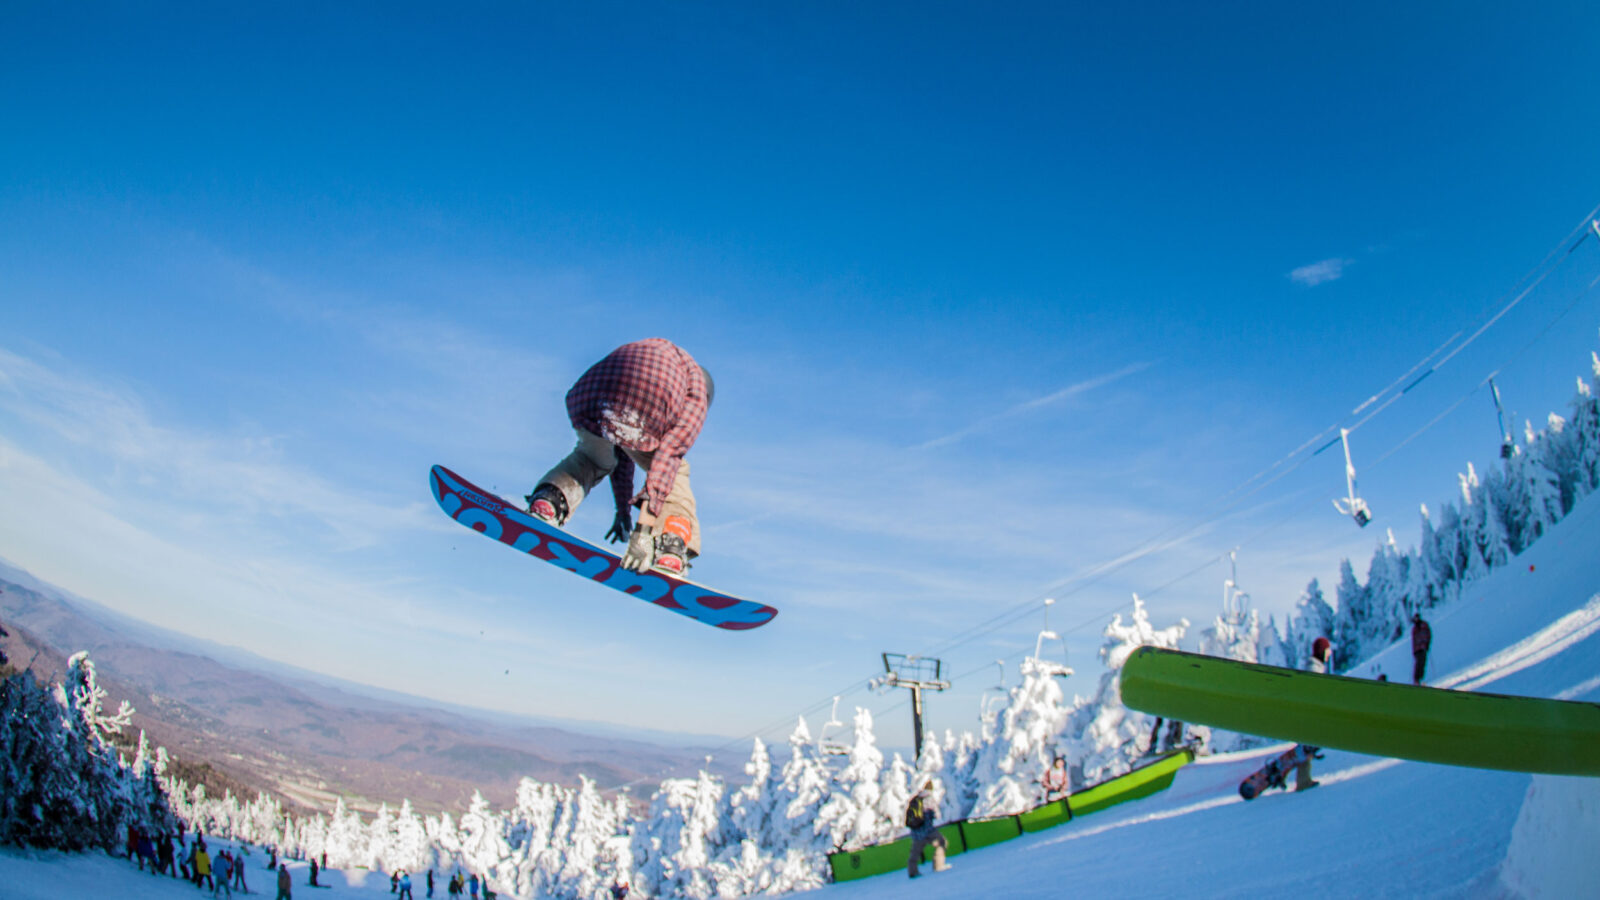 A snowboarder is mid-air after hitting a jump.